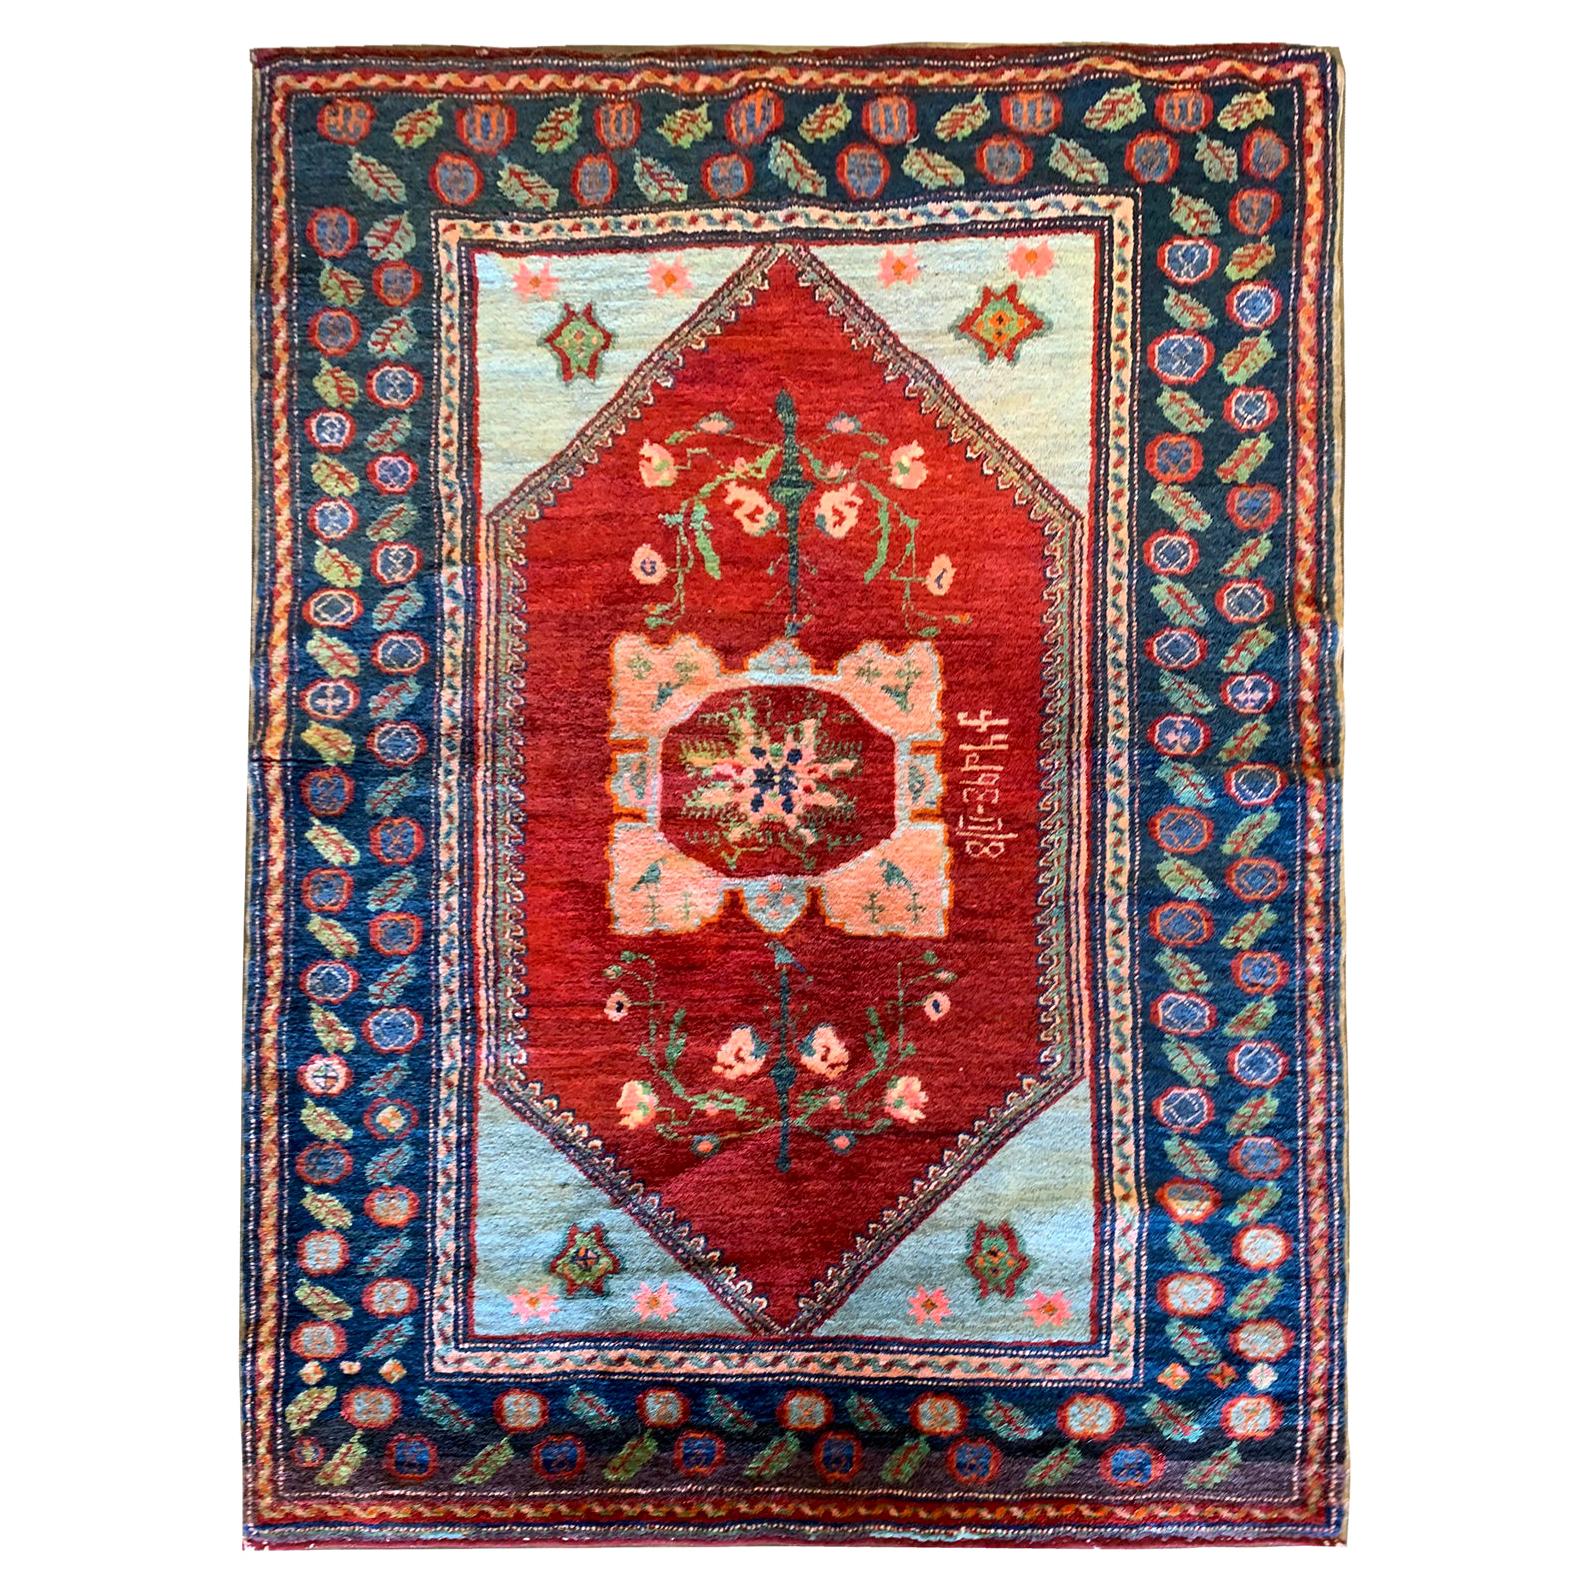 Antique Rugs Armenian Carpet, Handwoven Blue Red Wool Area Rug For Sale